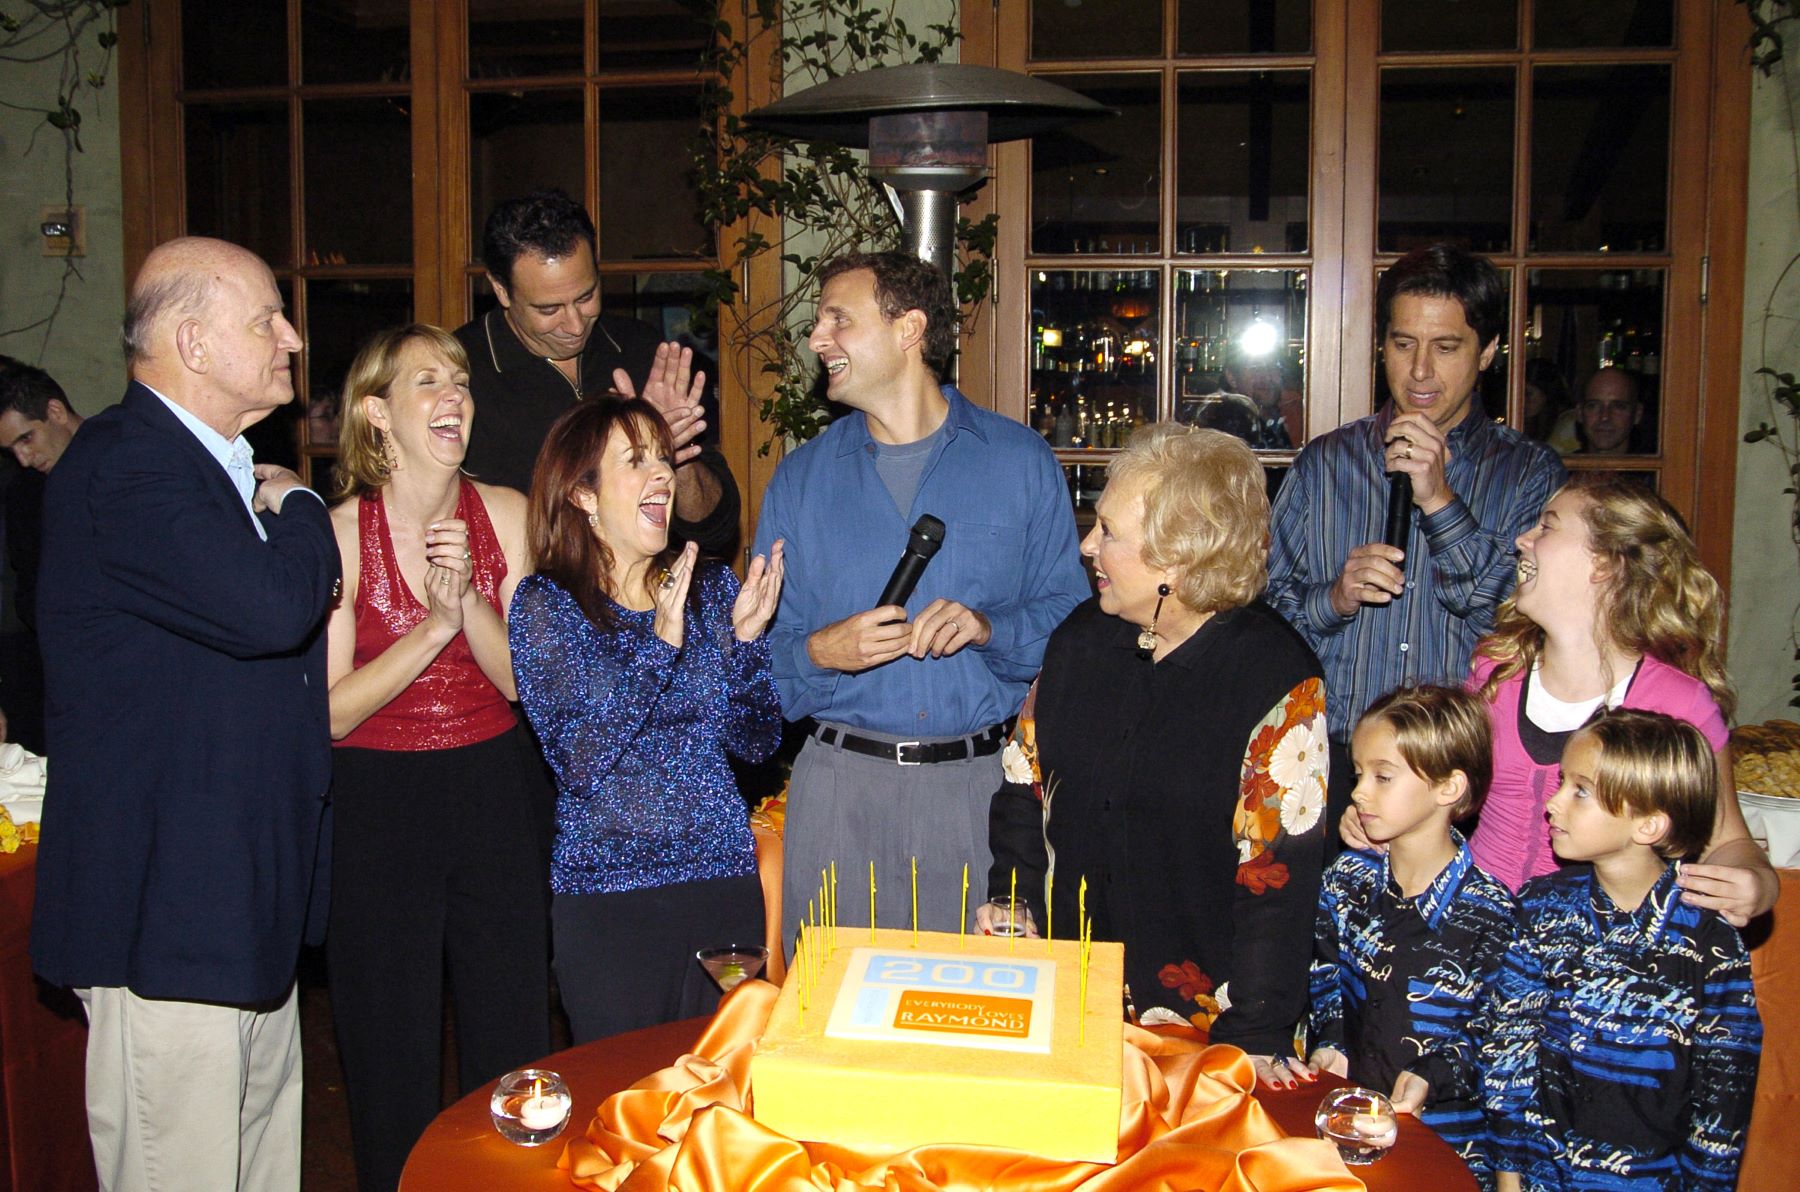 The 'Everybody Loves Raymond' cast and creator celebrating the show's 200th episode